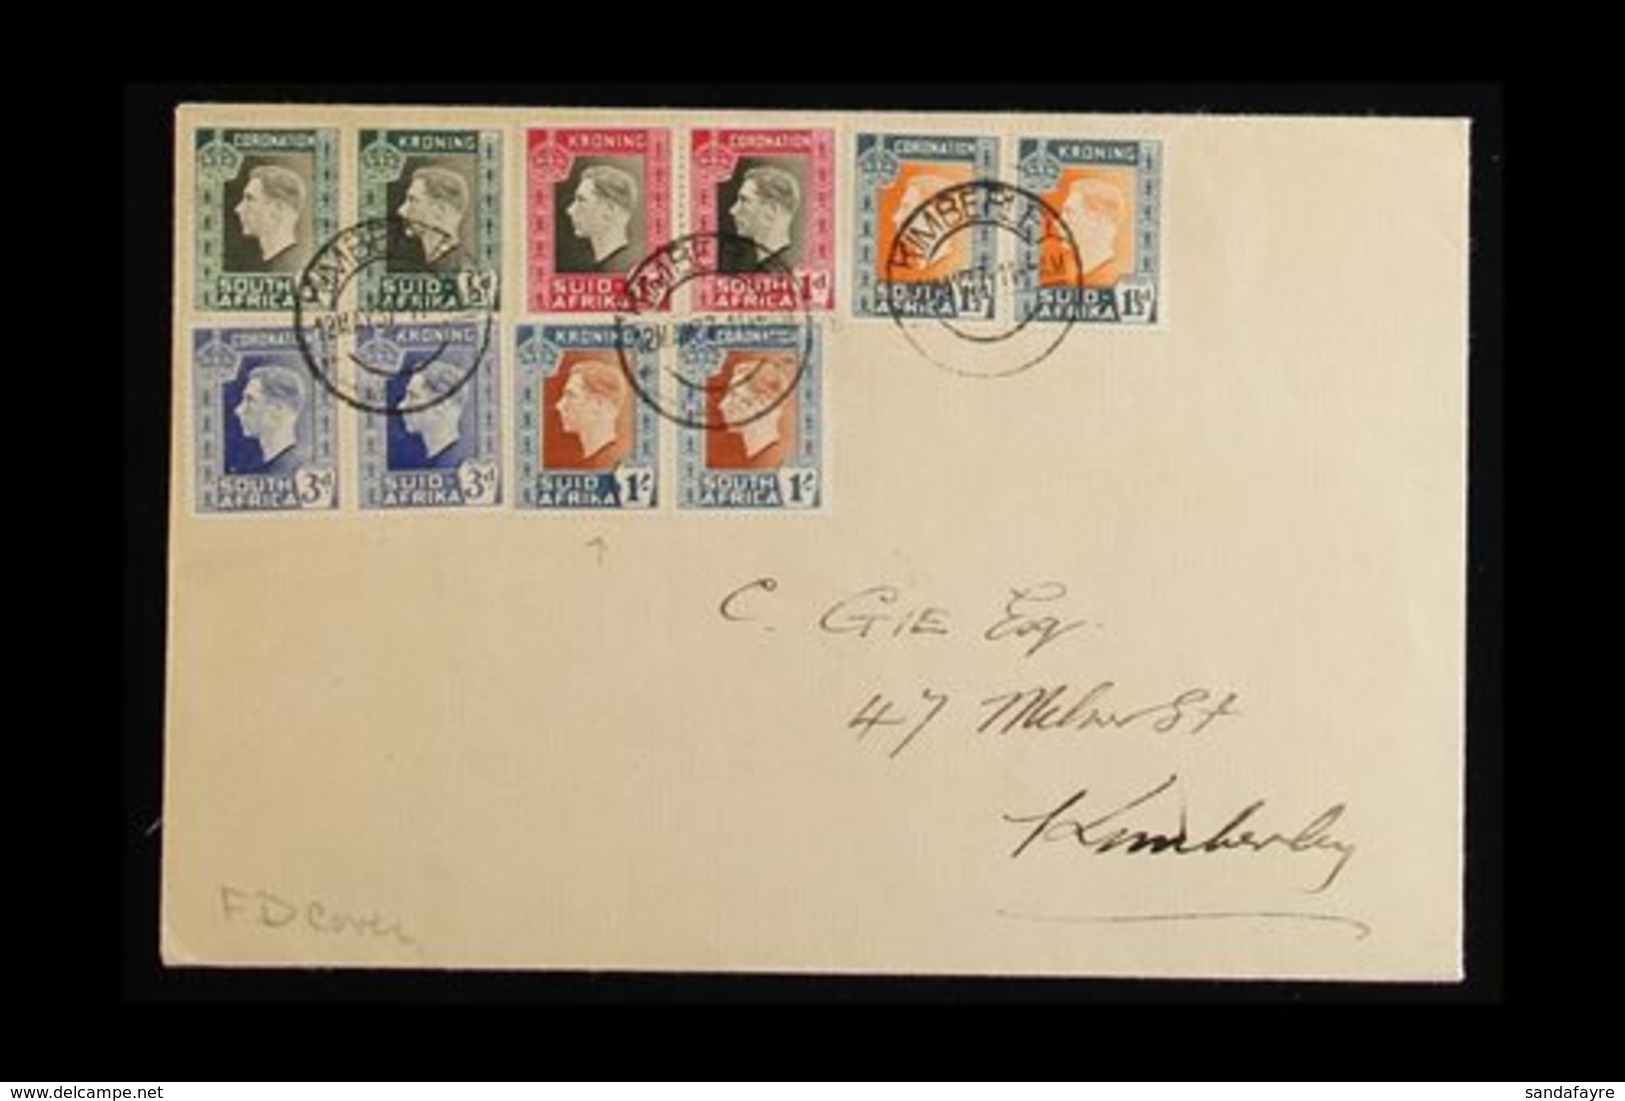 1937 Coronation Complete Set, SG 71/75, As Horizontal Pairs On Plain FDC Tied By Kimberley Cds's Of 12 MAY 37, The 1s Is - Zonder Classificatie